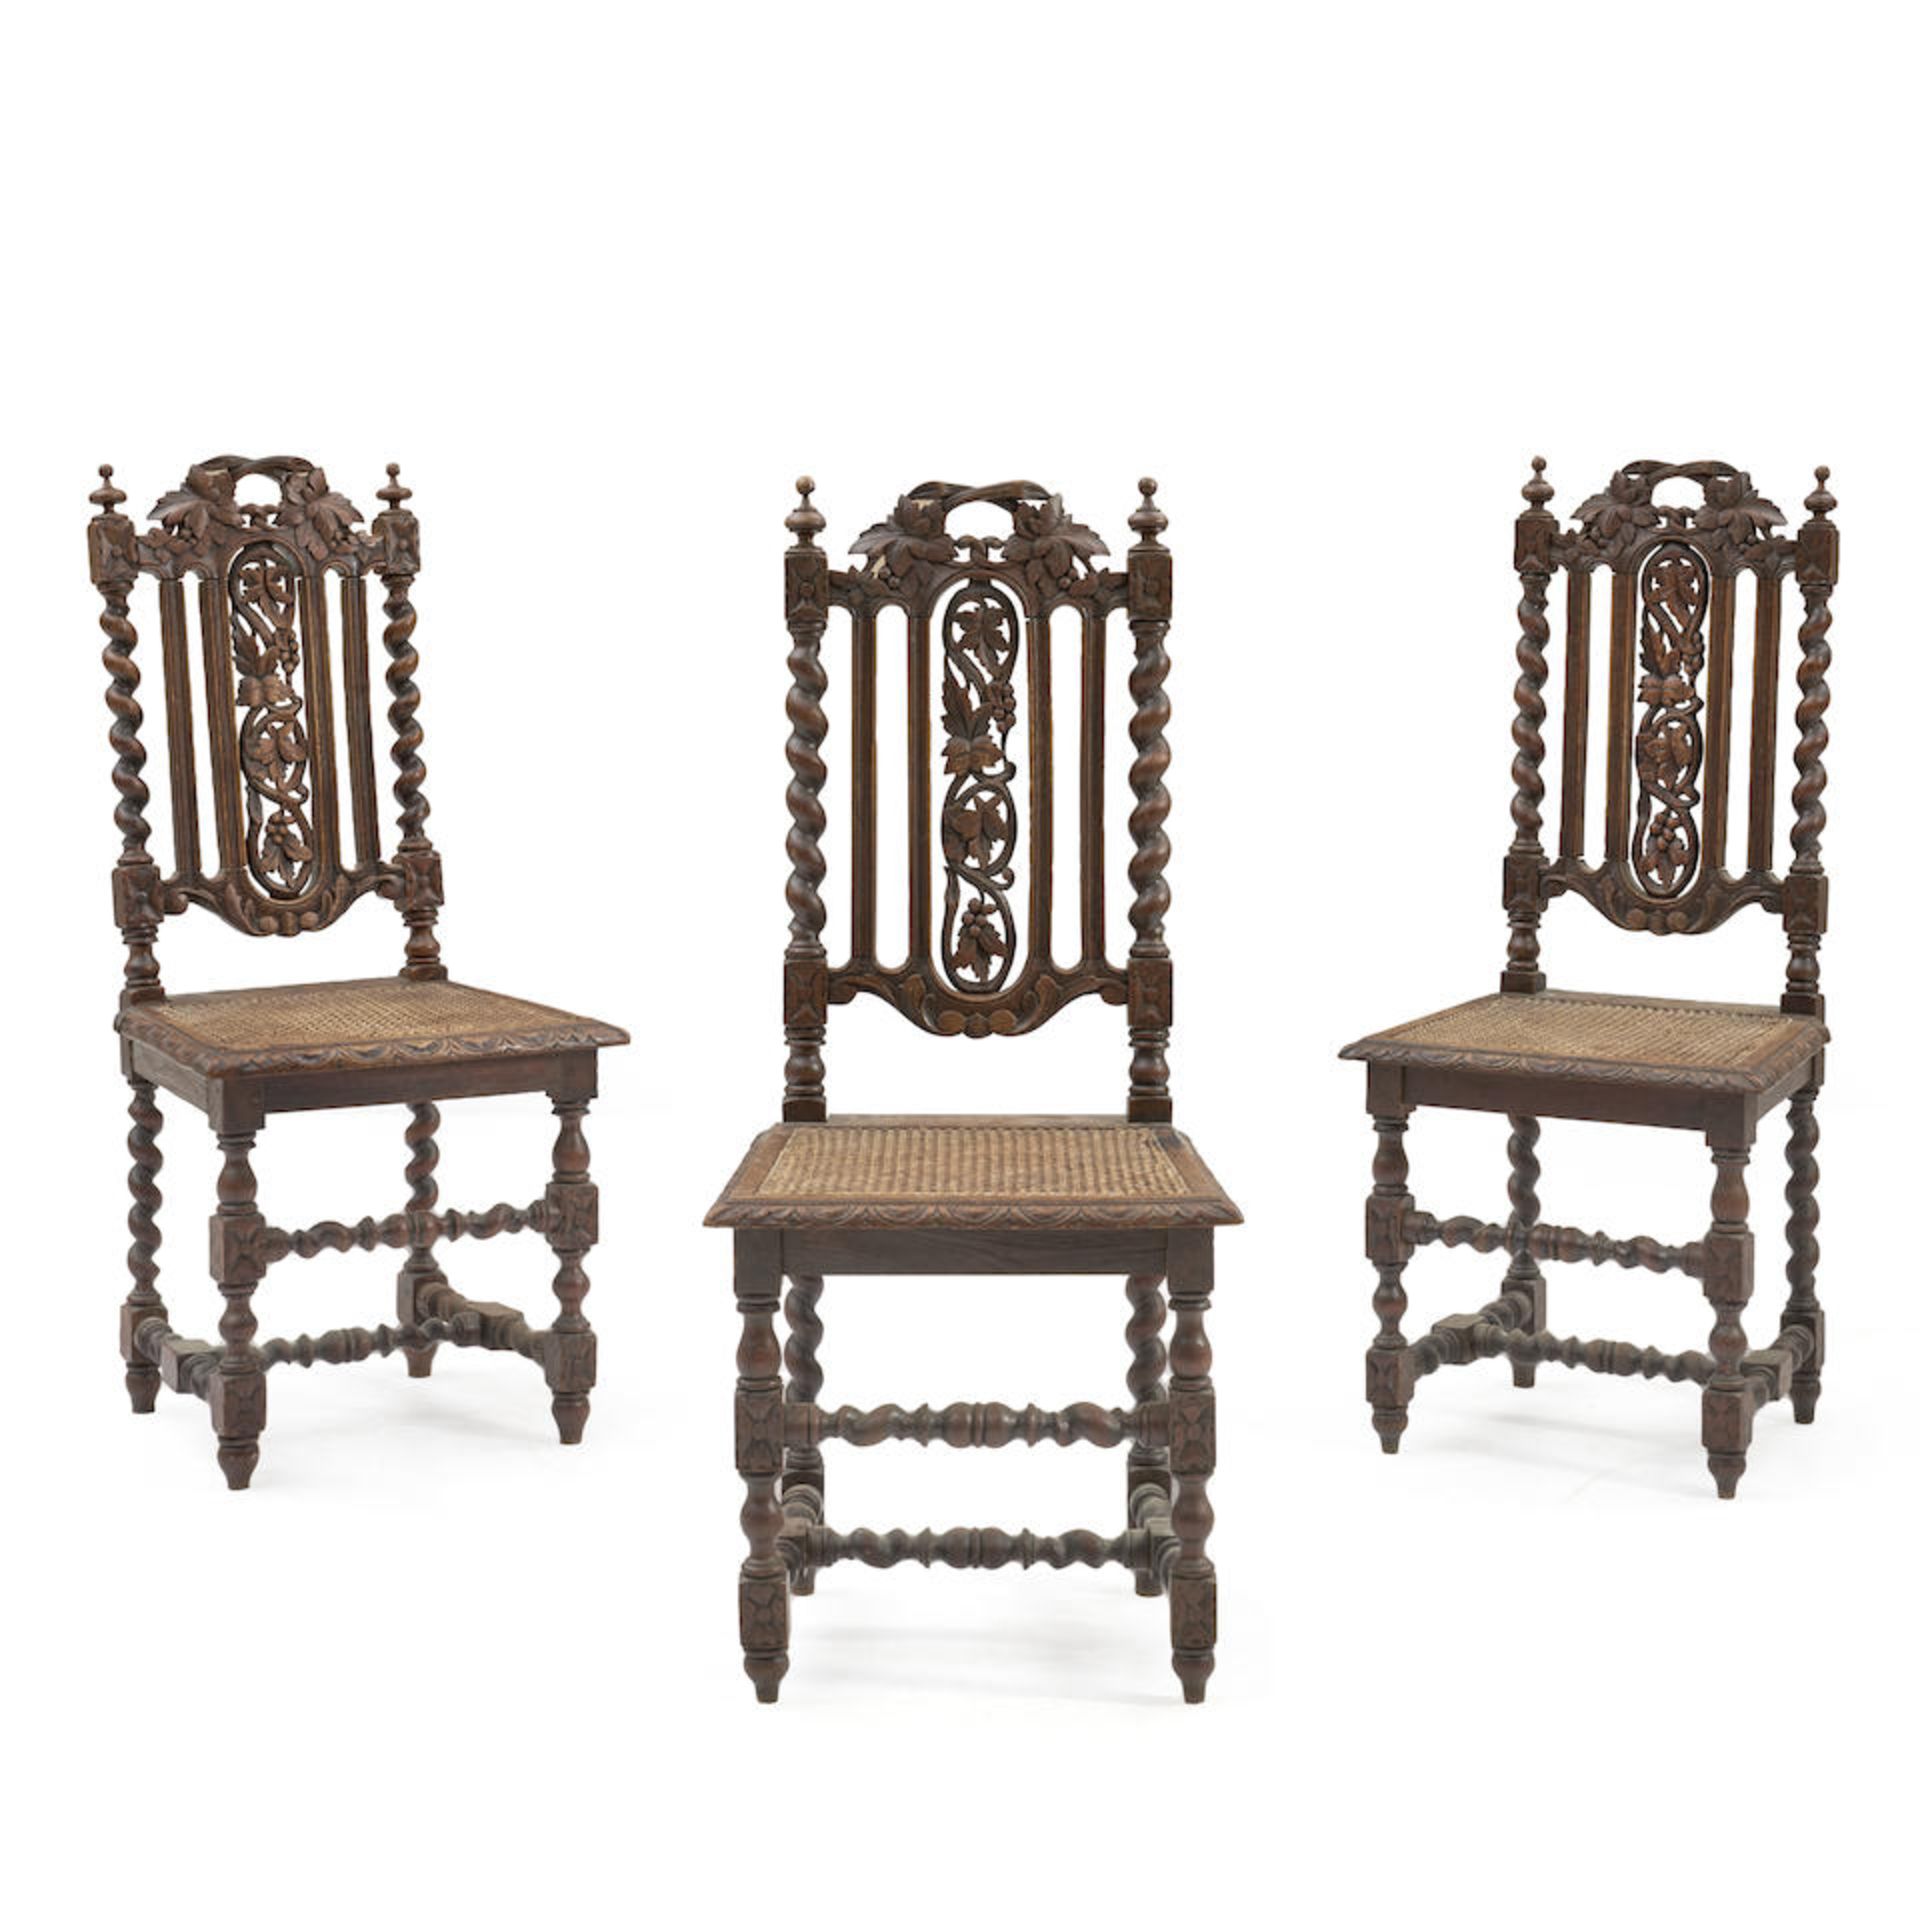 SET OF THREE OAK CARVED RENAISSANCE STYLE HUNTING CHAIRS